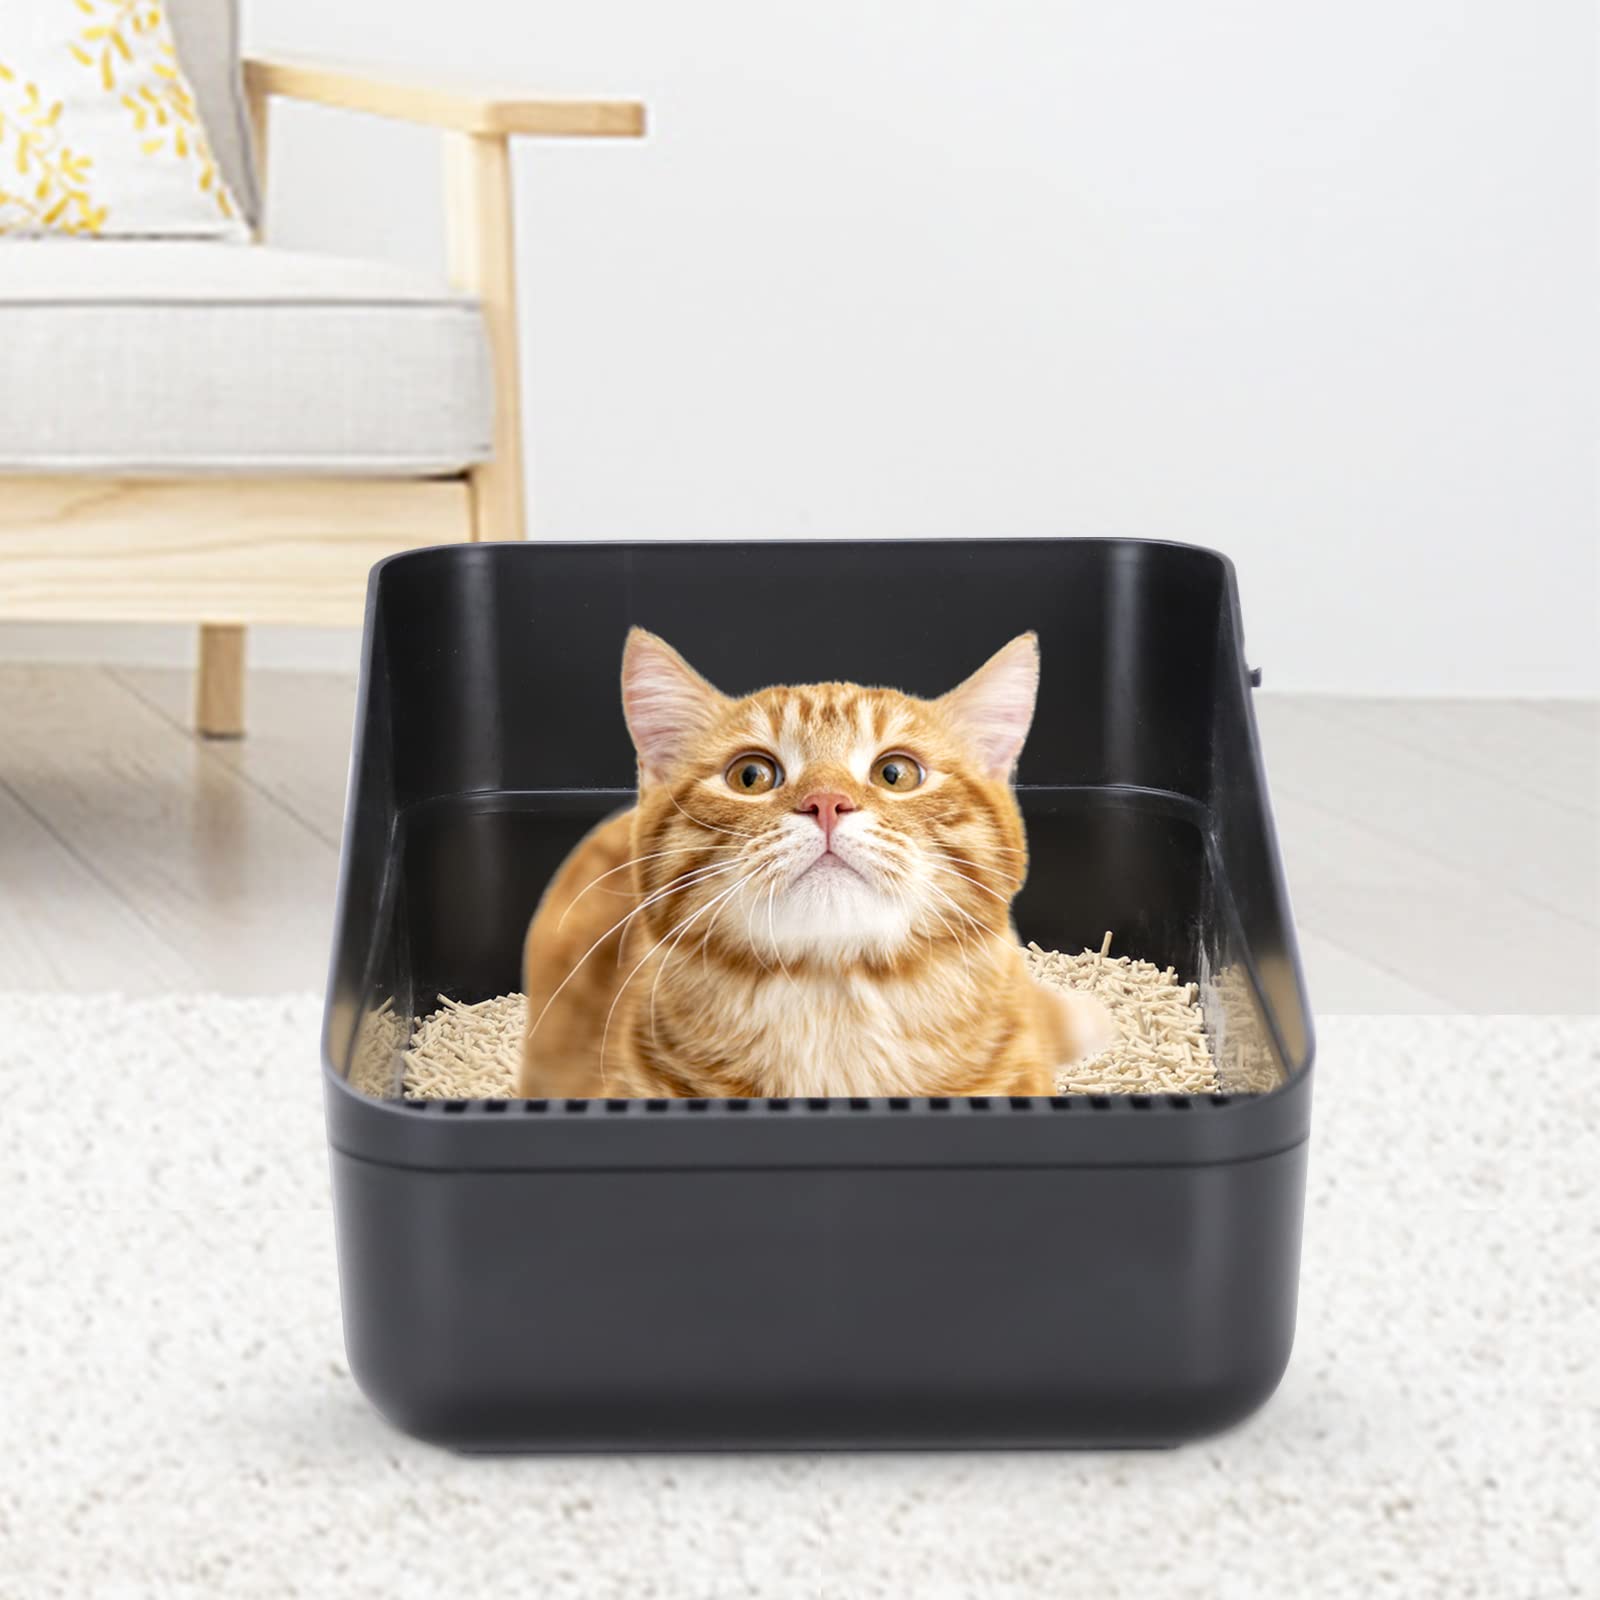 Sfozstra Open Litter Box,Durable High Side Sifting, Secure and Odor Litter Box, Removable Litter Box, Easy to clean Litter Box f